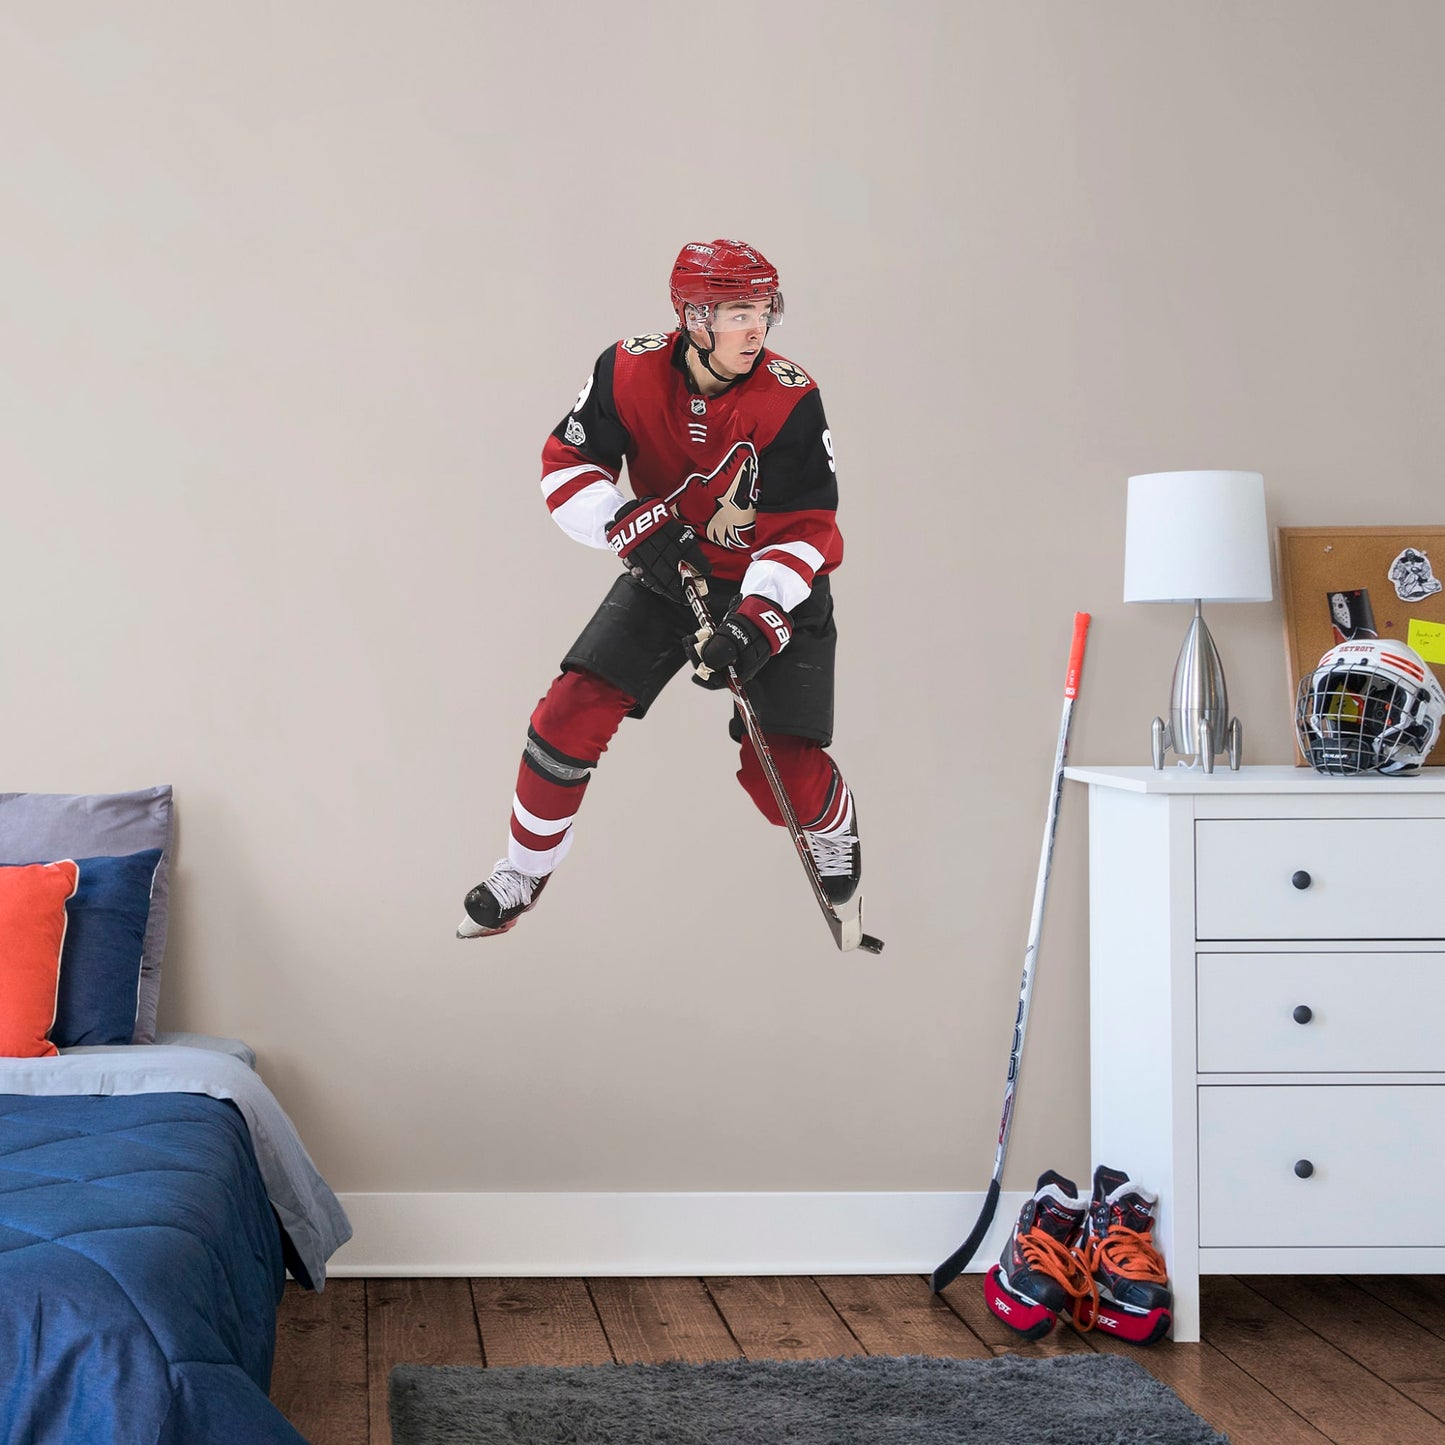 Giant Athlete + 1 Decal (31"W x 51"H) Drafted seventh overall in the 2016, left wing player Clayton Keller is melting ice at Gila River Arena in Glendale. Cheer on Kellsy as he leads the Coyotes on to another championship with this distinctive colorful officially licensed NHL wall decal. Make a slap shot on a wall in your home, office, or coyote fan-den with this giftable reusable NHL decal. Perfect gift idea for a fan!